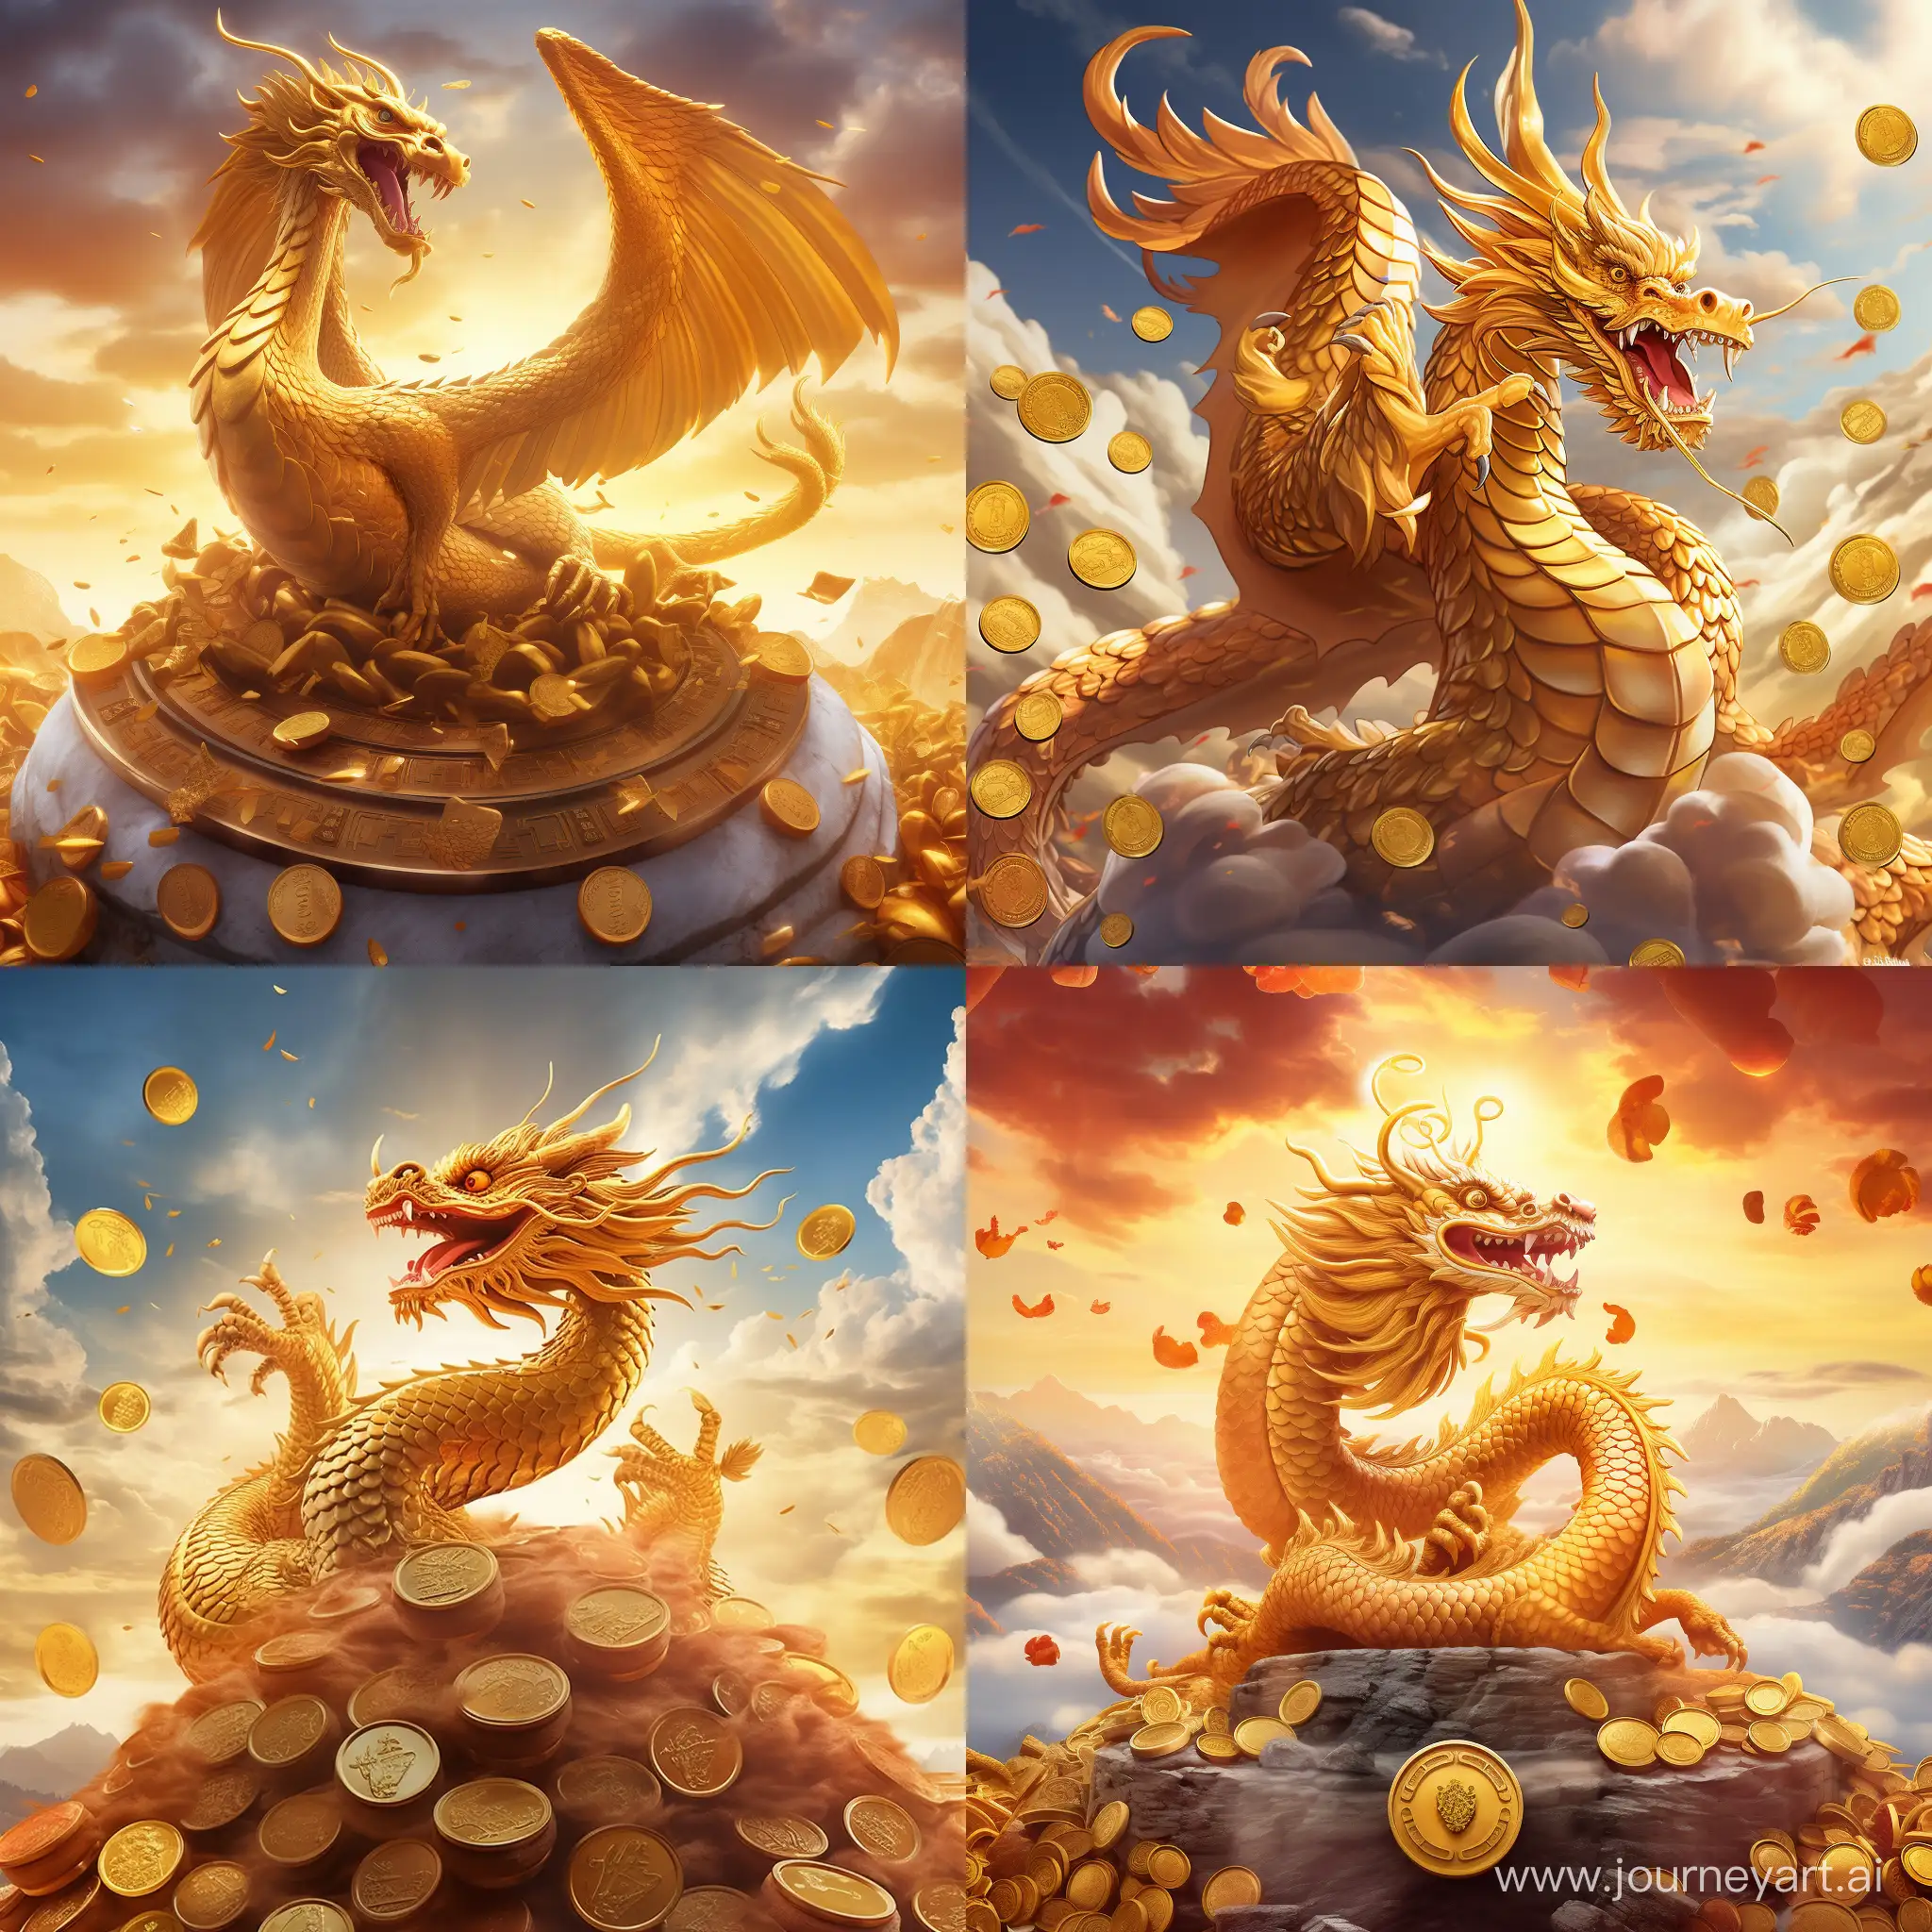 Majestic-Golden-Chinese-Dragon-Soaring-Amidst-a-Sea-of-Gold-Coins